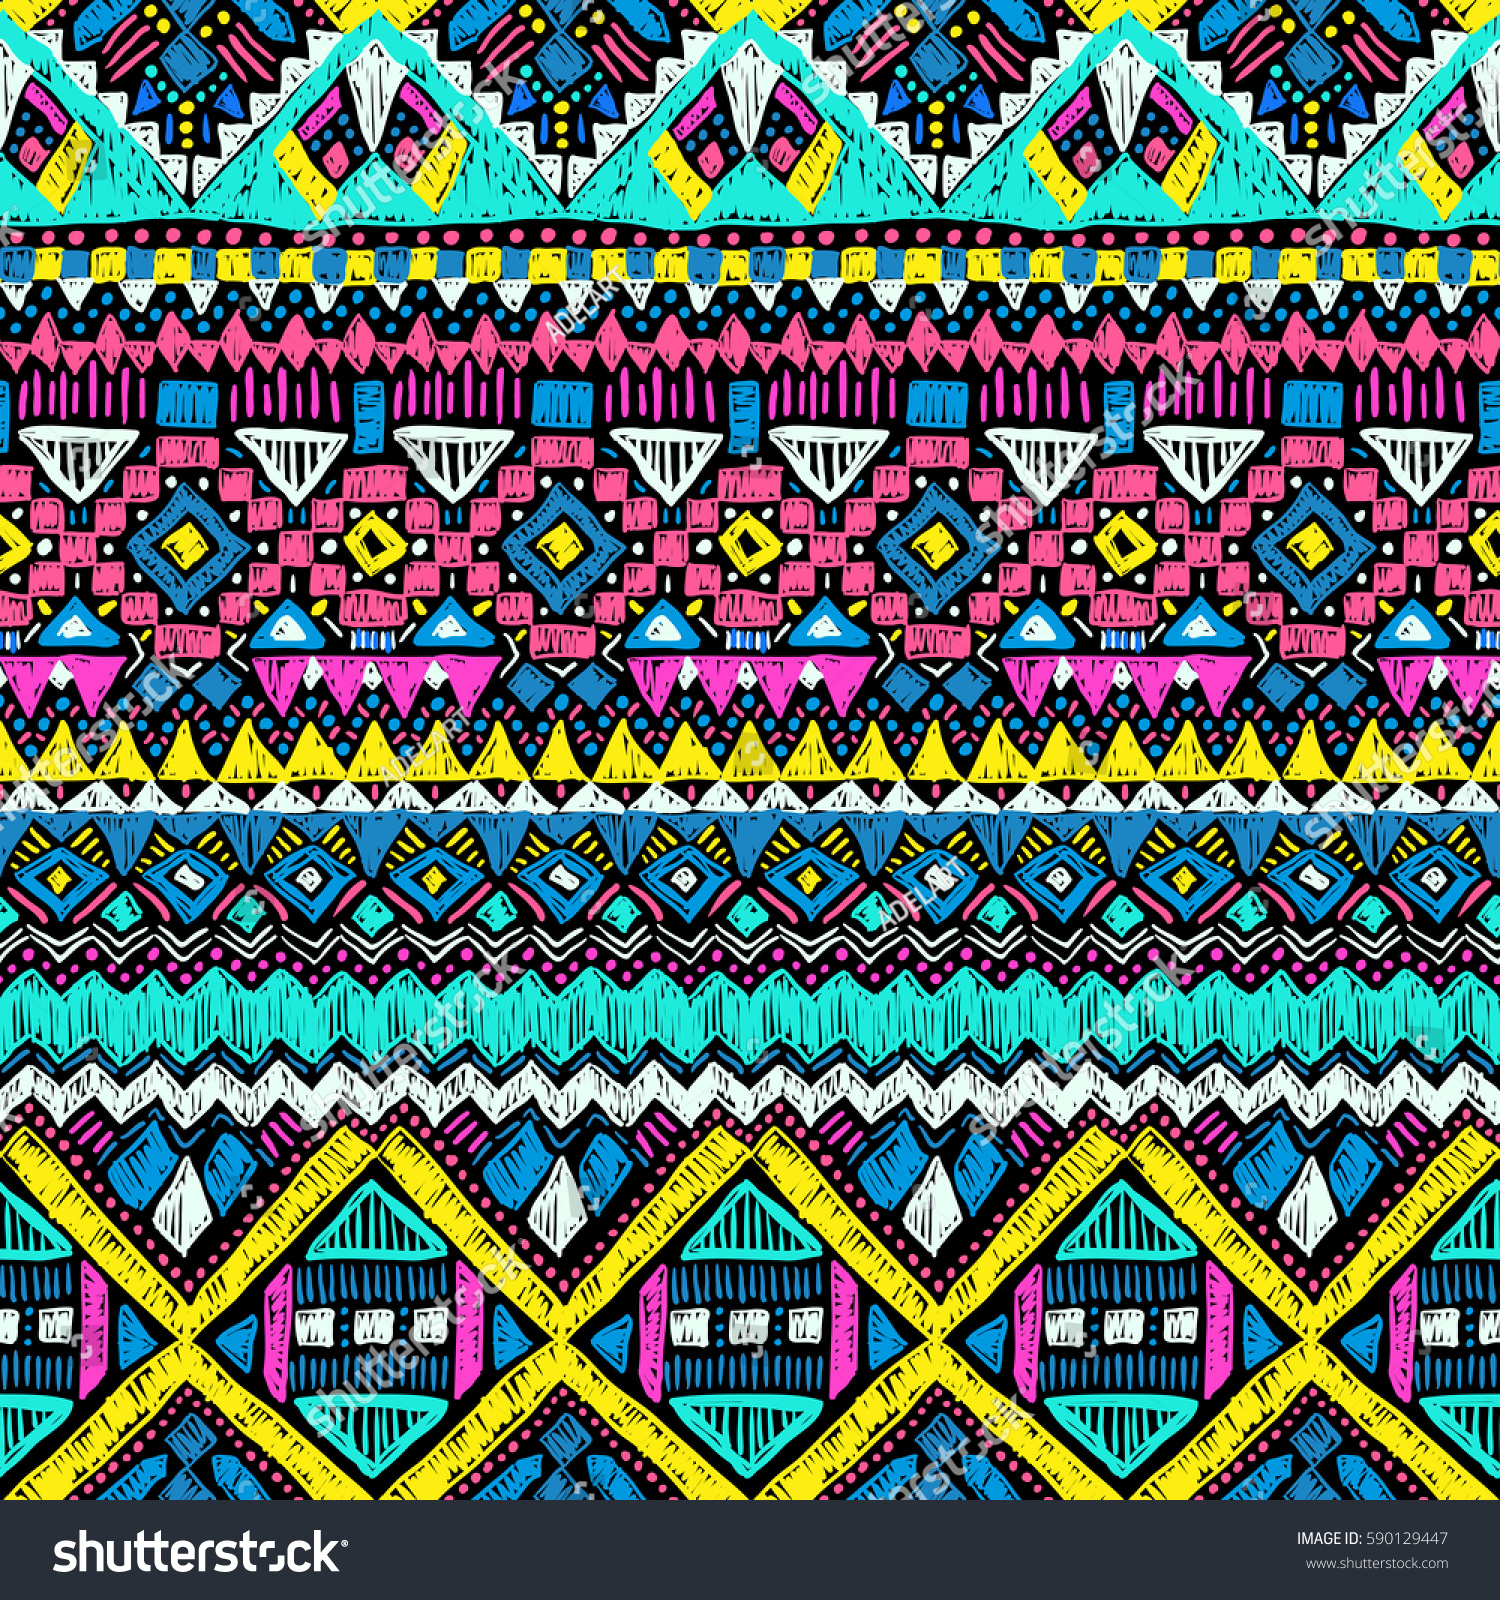 Fabric Pattern Tribal Ornament Ethnic Style Stock Vector (Royalty Free ...